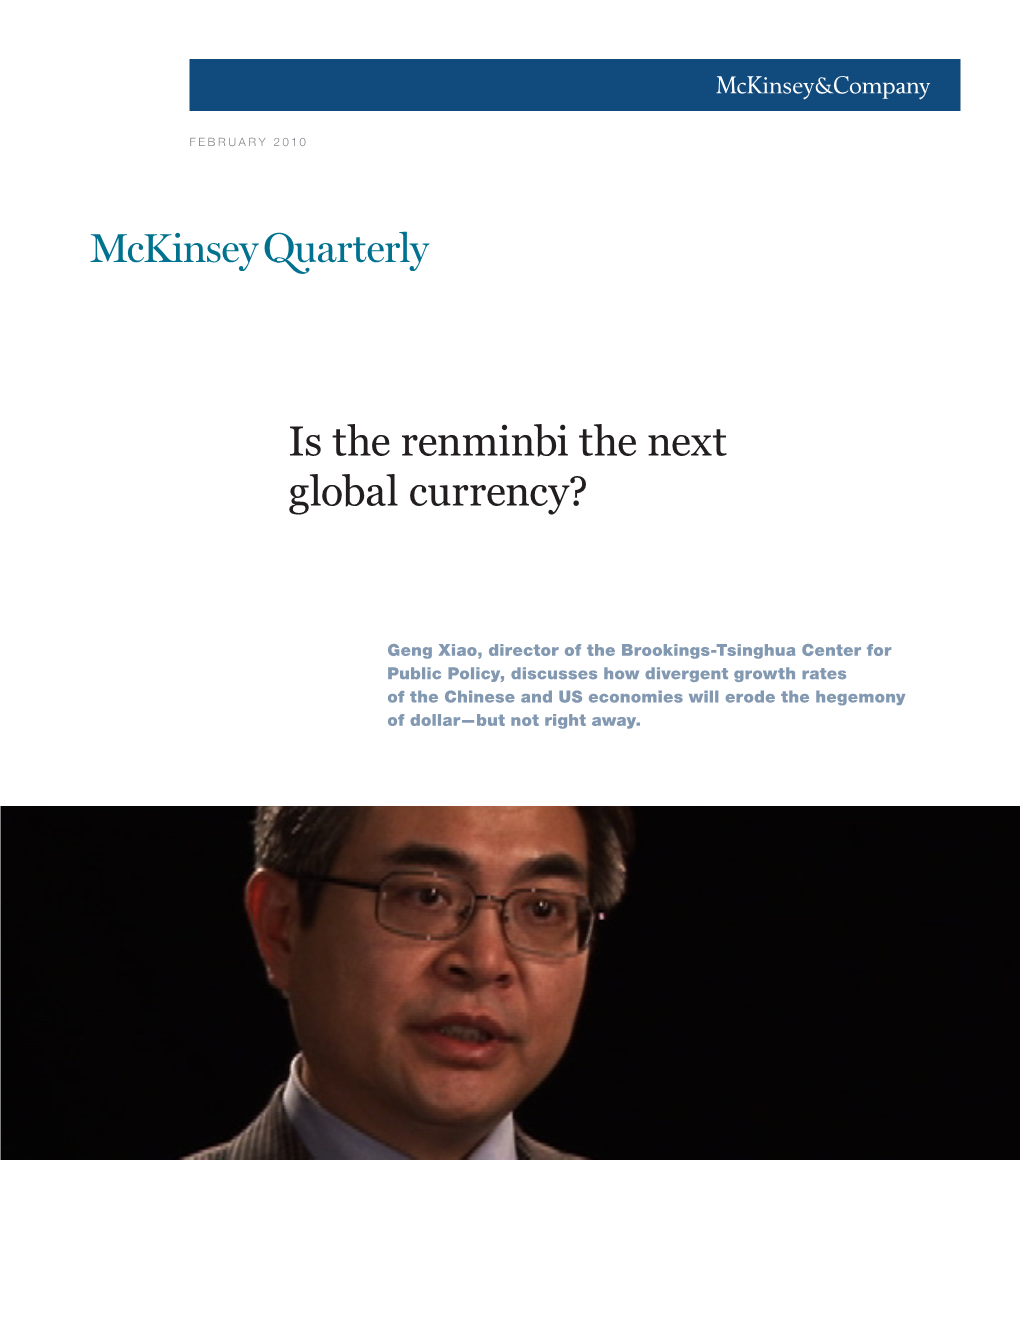 Is the Renminbi the Next Global Currency?